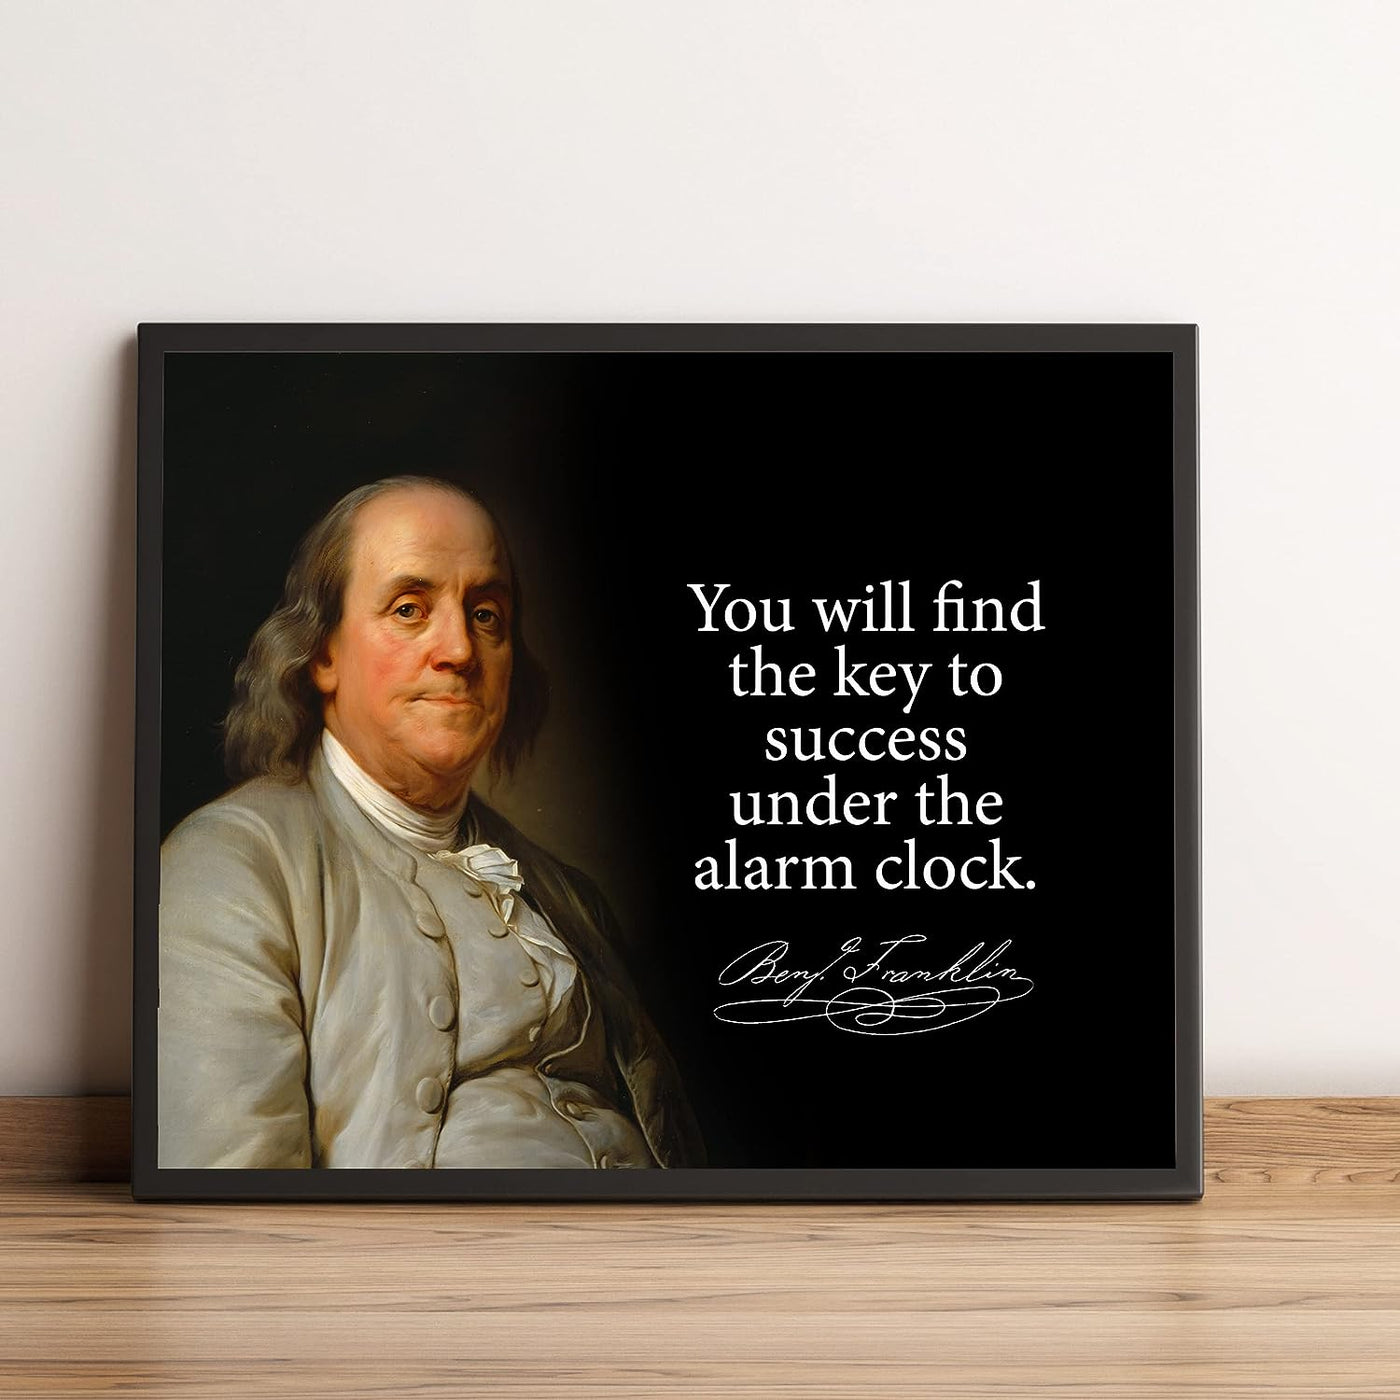 Find Key to Success Under Alarm Clock Motivational Quotes Wall Art -10 x 8" Benjamin Franklin Portrait Print -Ready to Frame. Home-Office-History Classroom-Library Decor. Great Gift of Motivation!